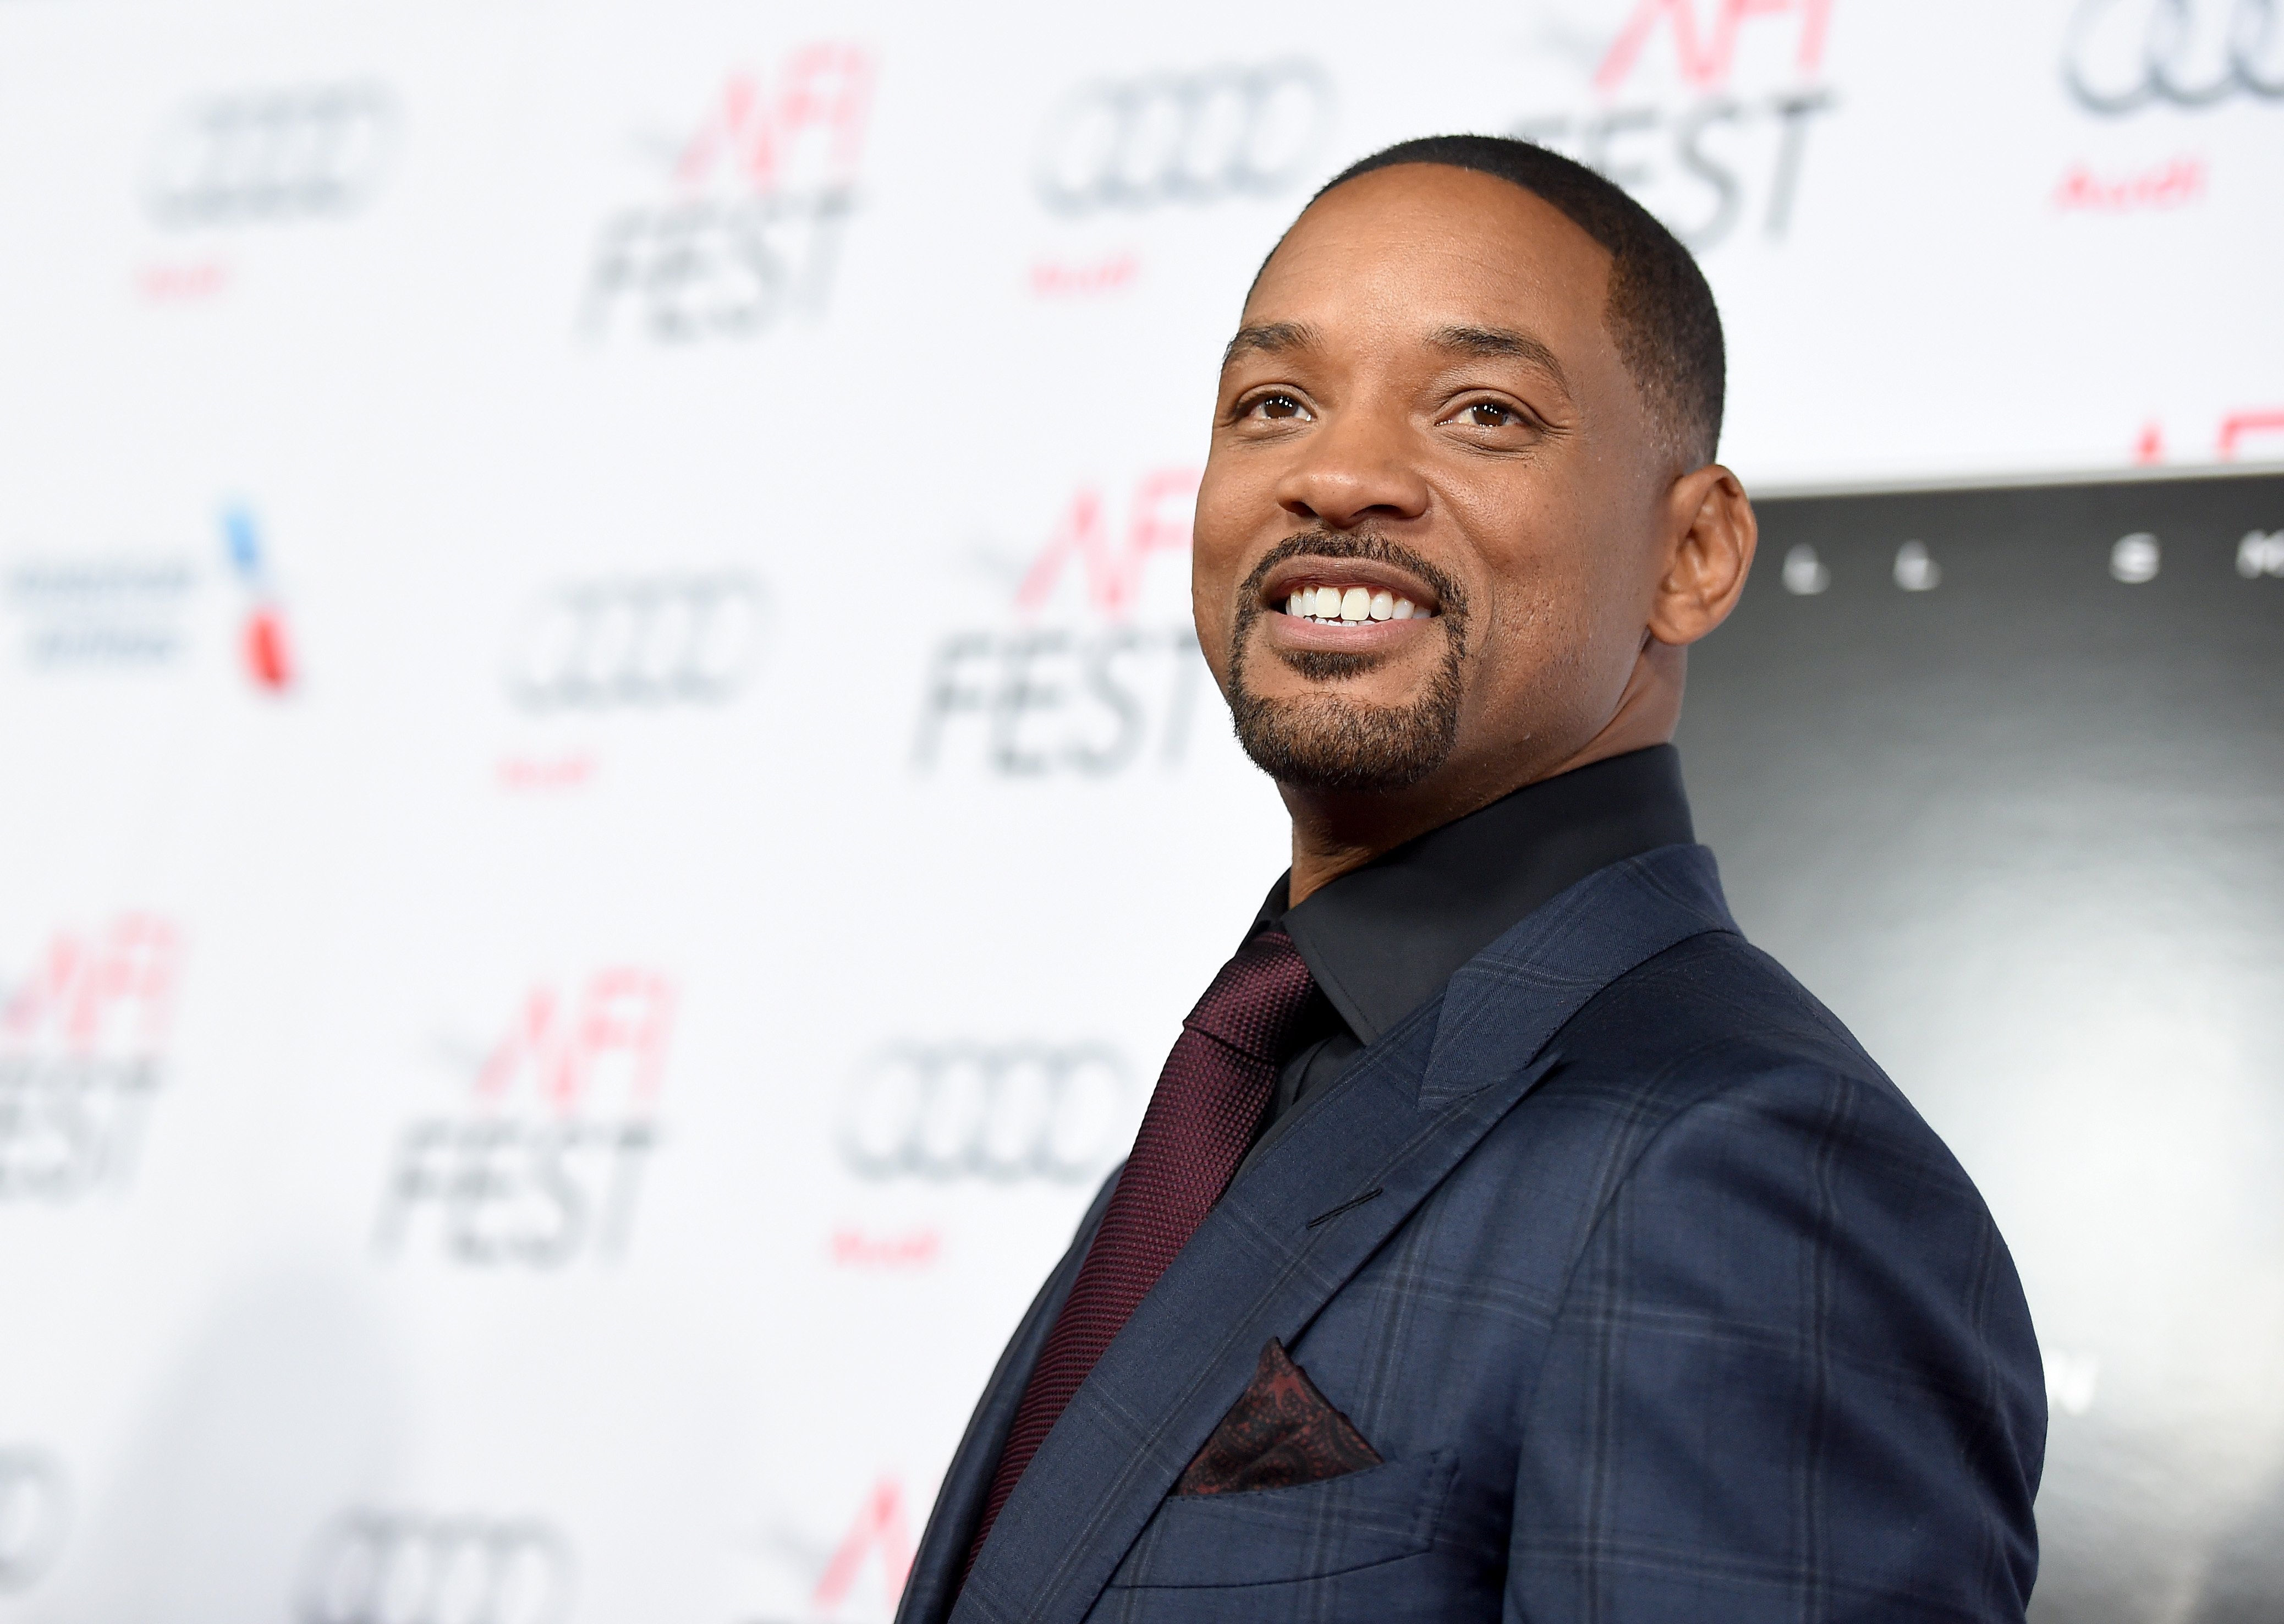 Will Smith at the Centerpiece Gala Premiere of "Concussion" during AFI FEST 2015 on Nov. 10, 2015 in California | Photo: Getty Images